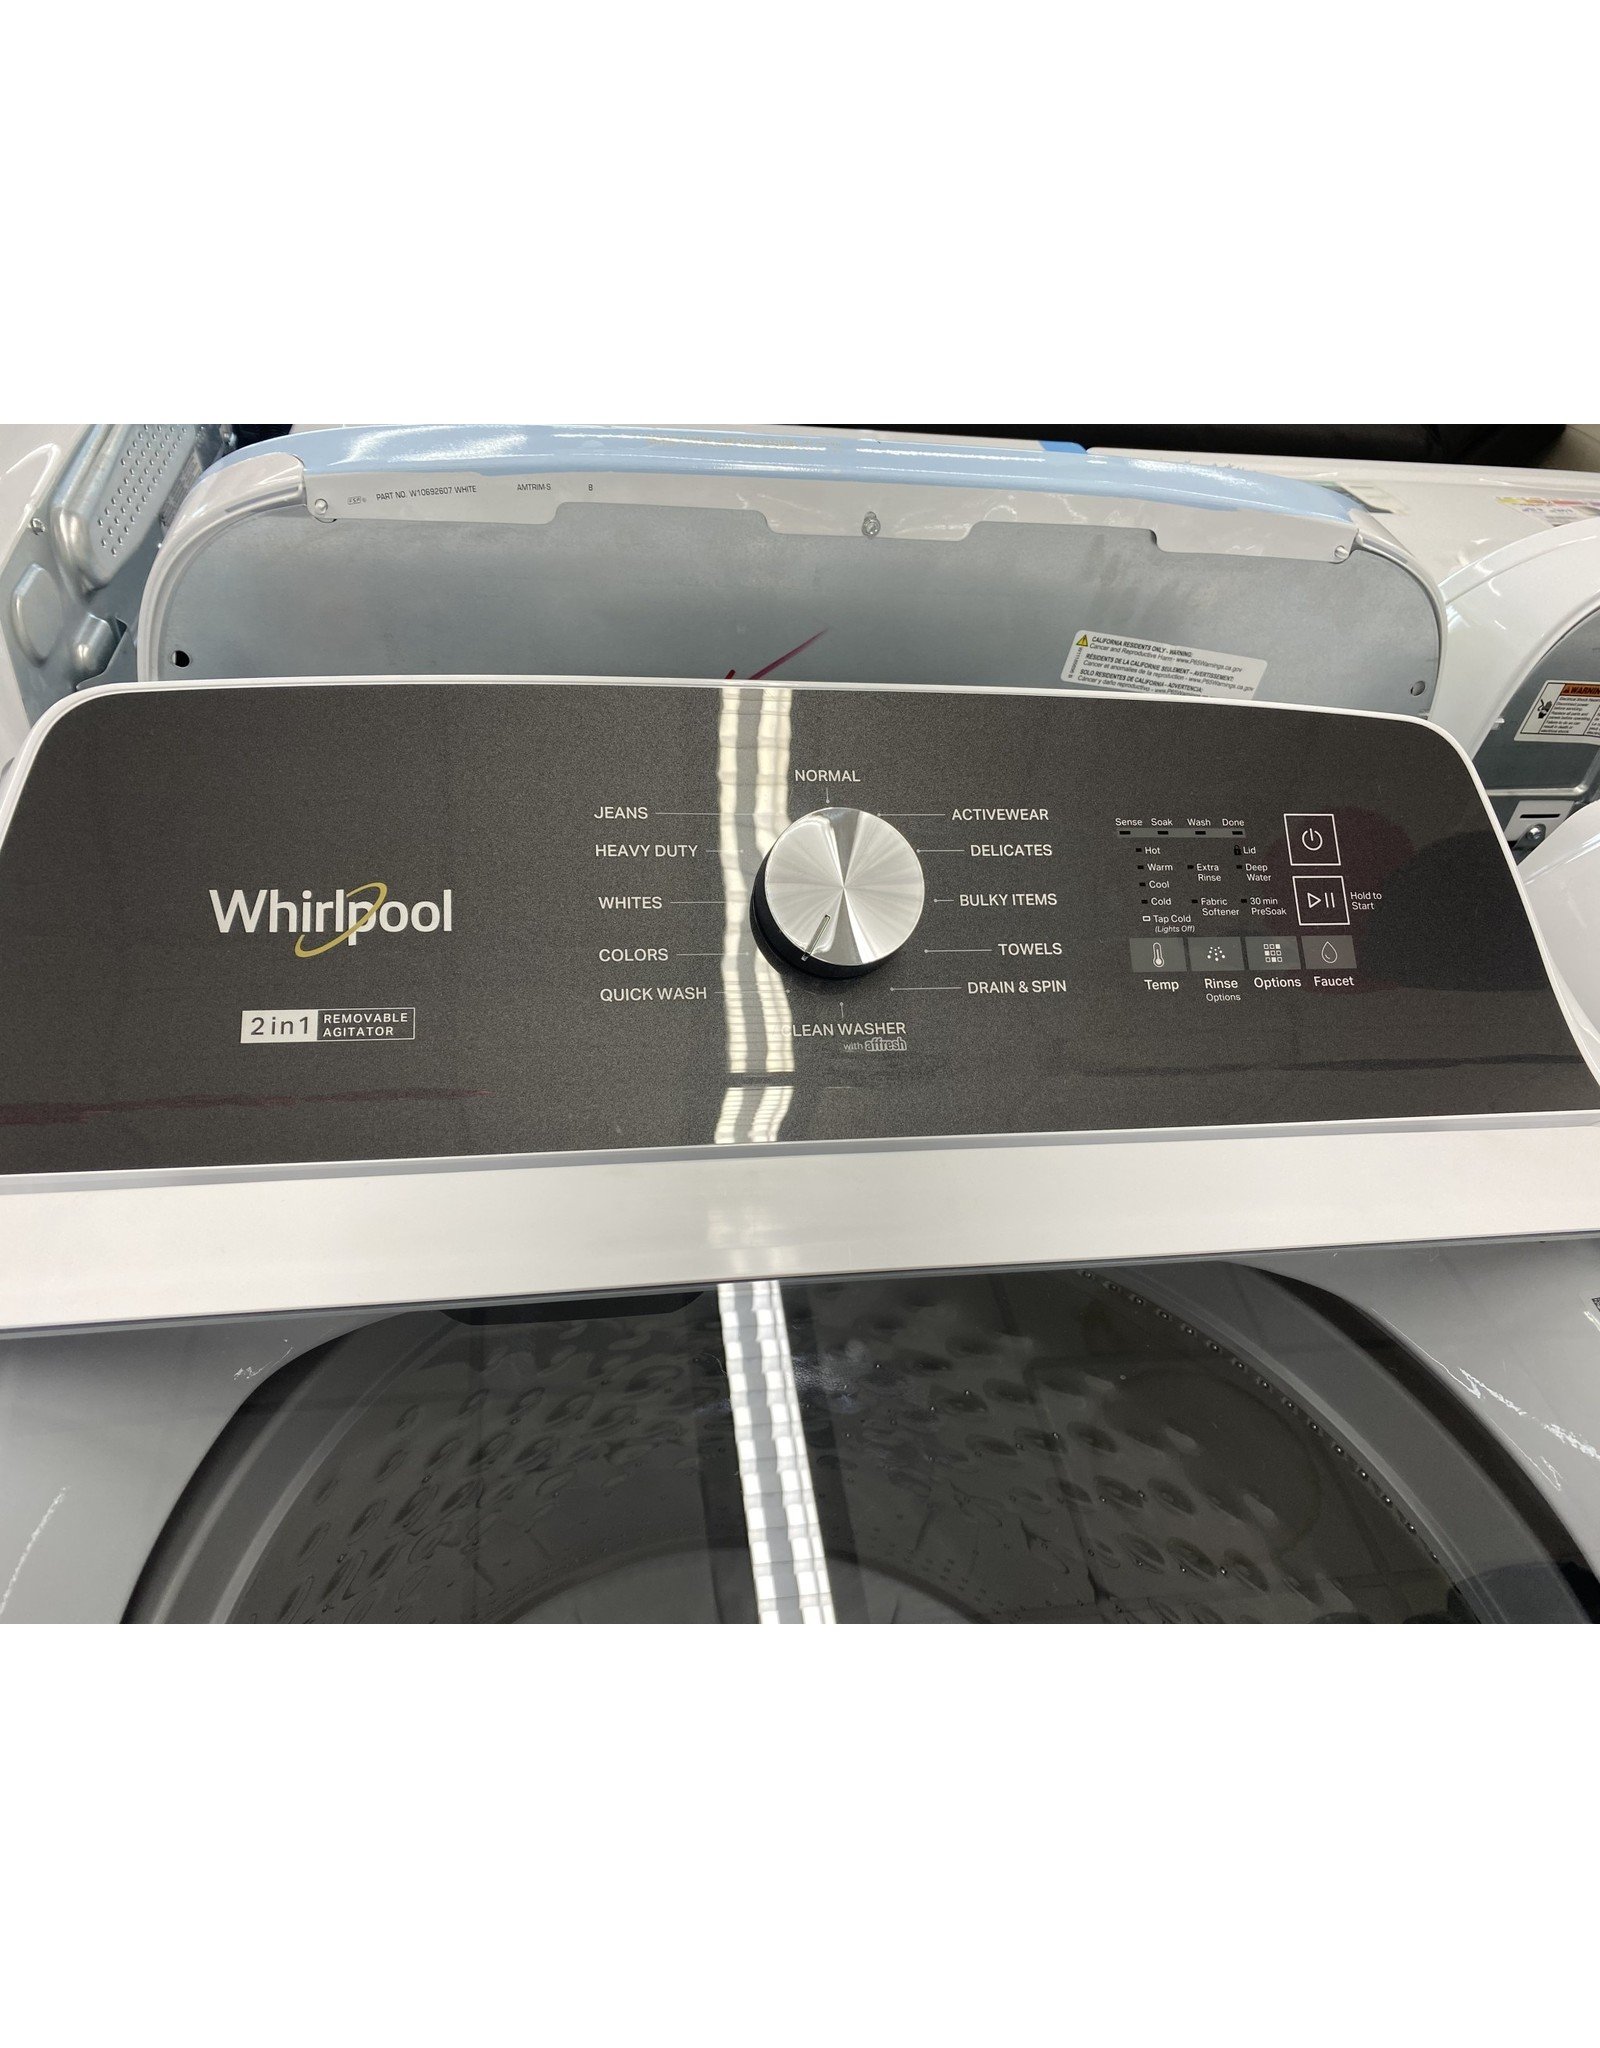 Whirlpool WTW5057LWLPR 4.7-4.8 CuFt Top Load Washer with the 7.0